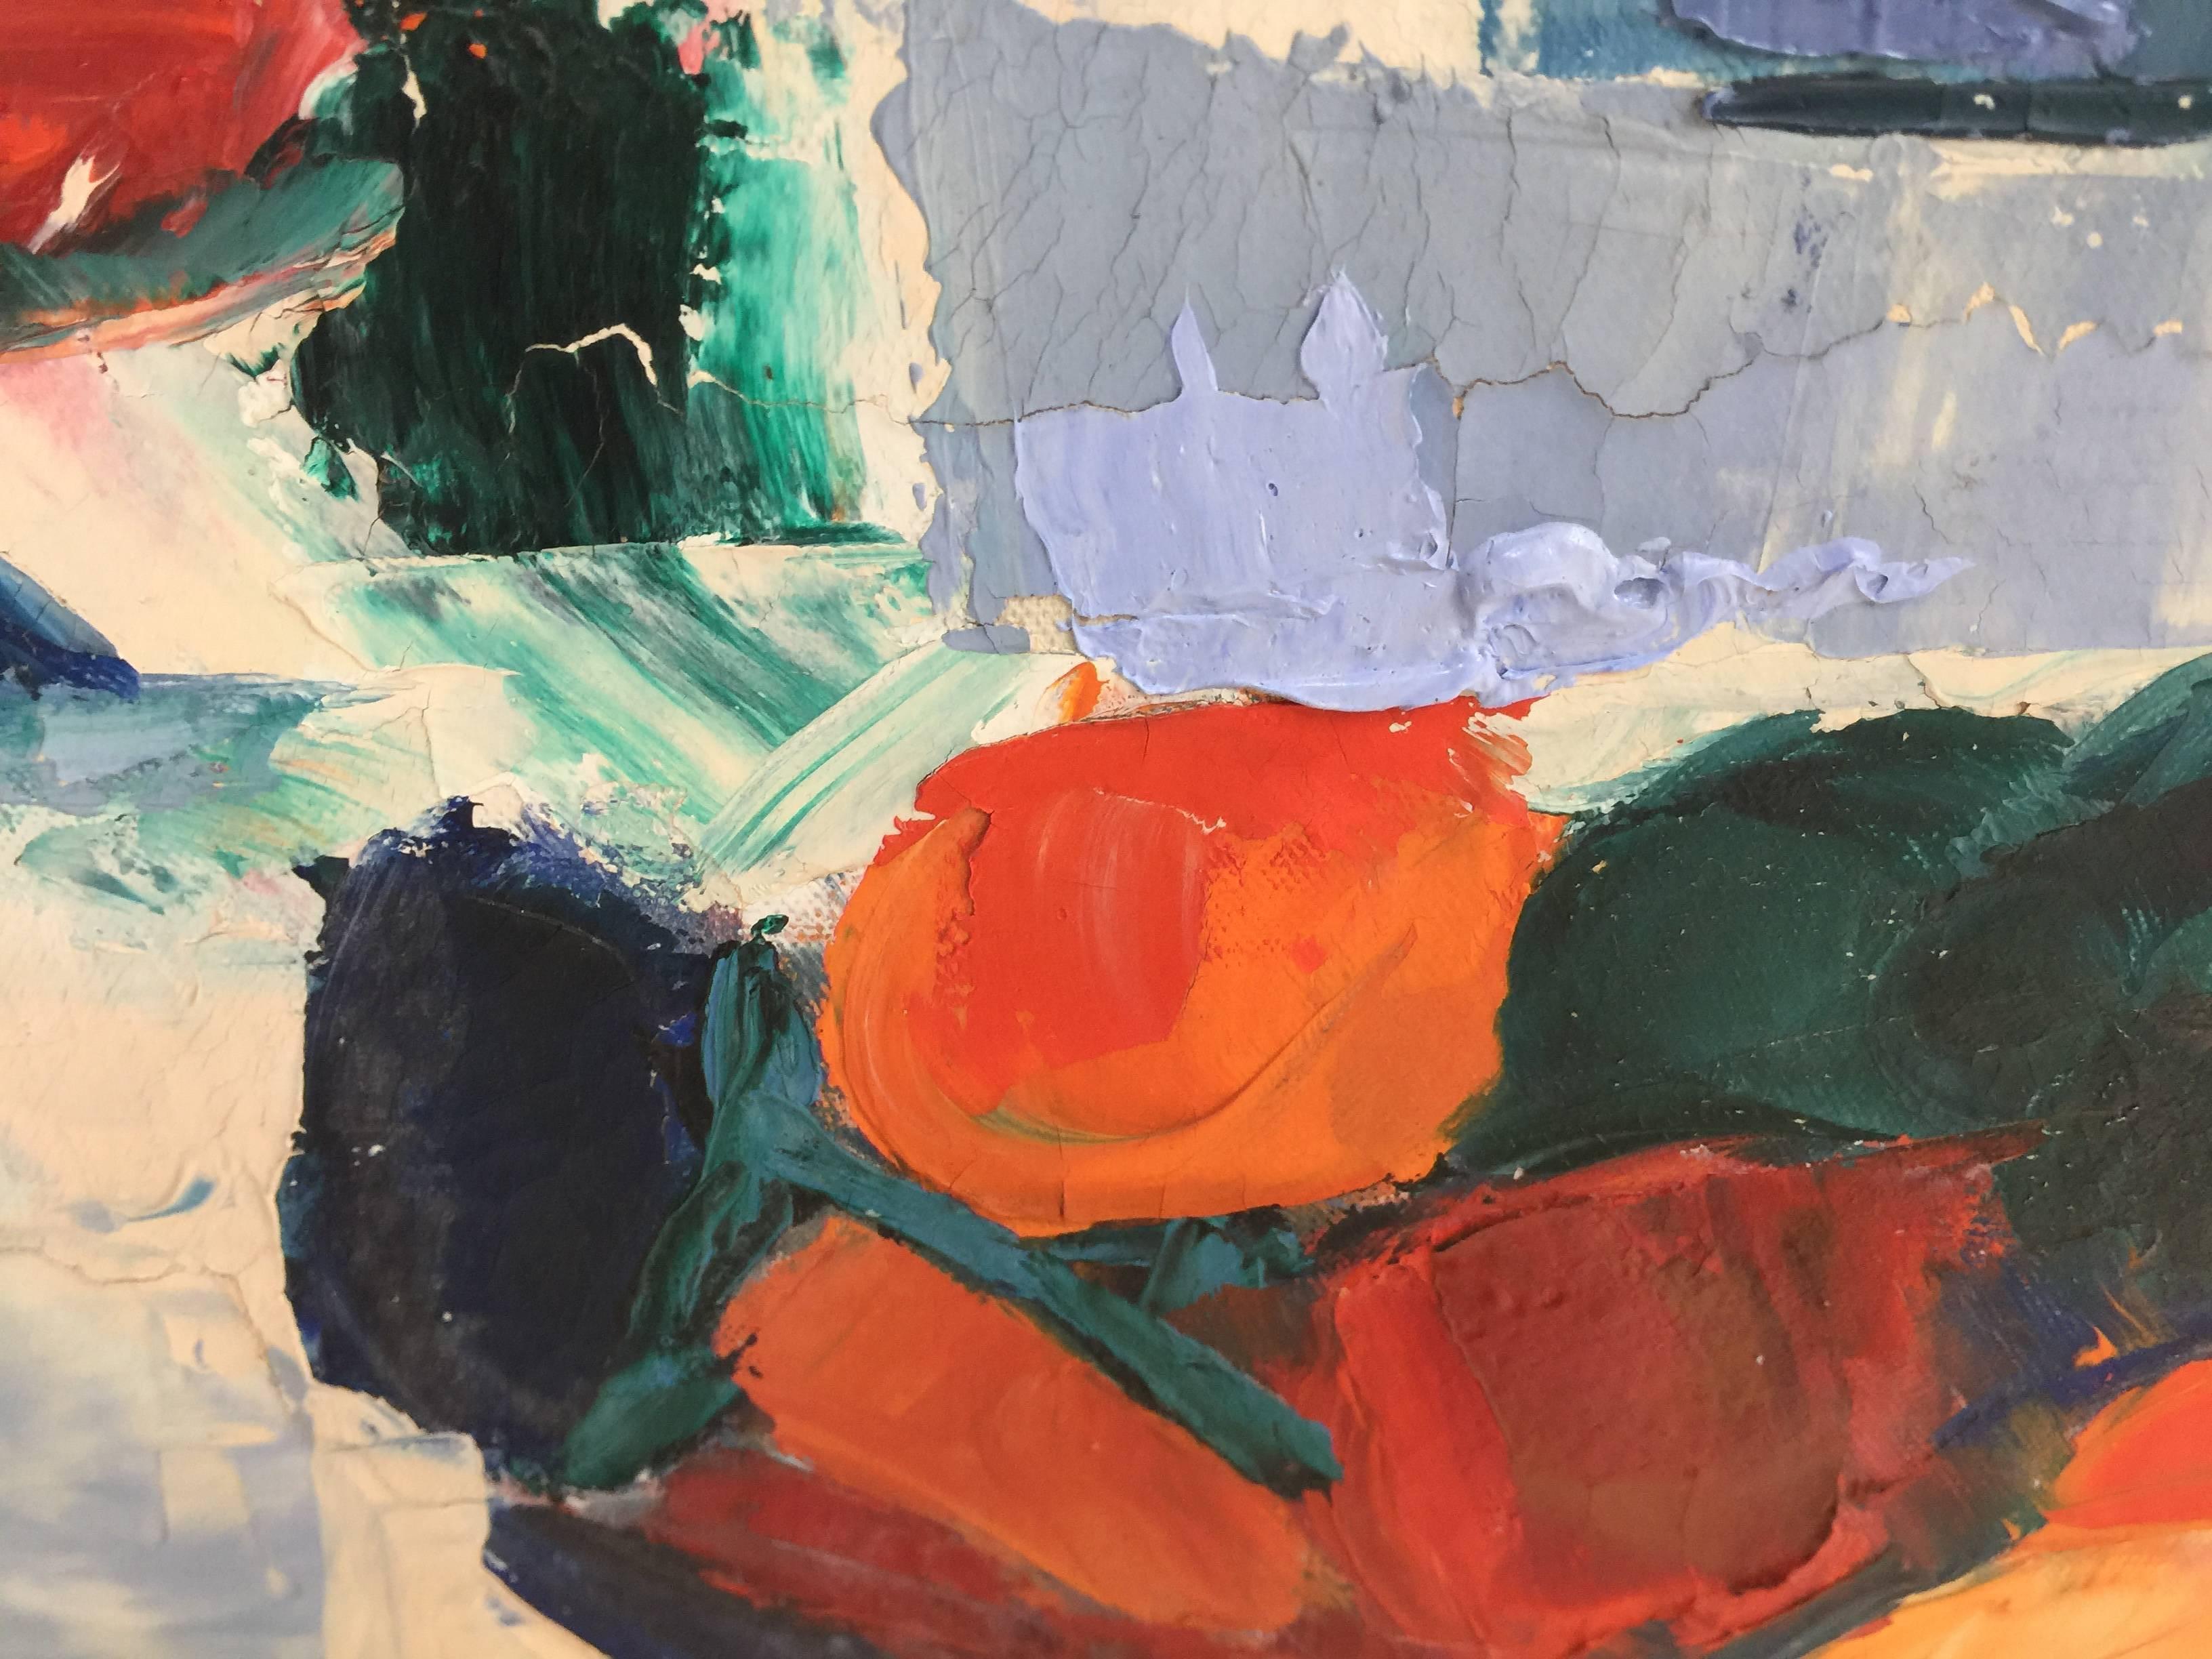 American S Goldman Abstract Still Life Oil on Canvas, 1960s For Sale